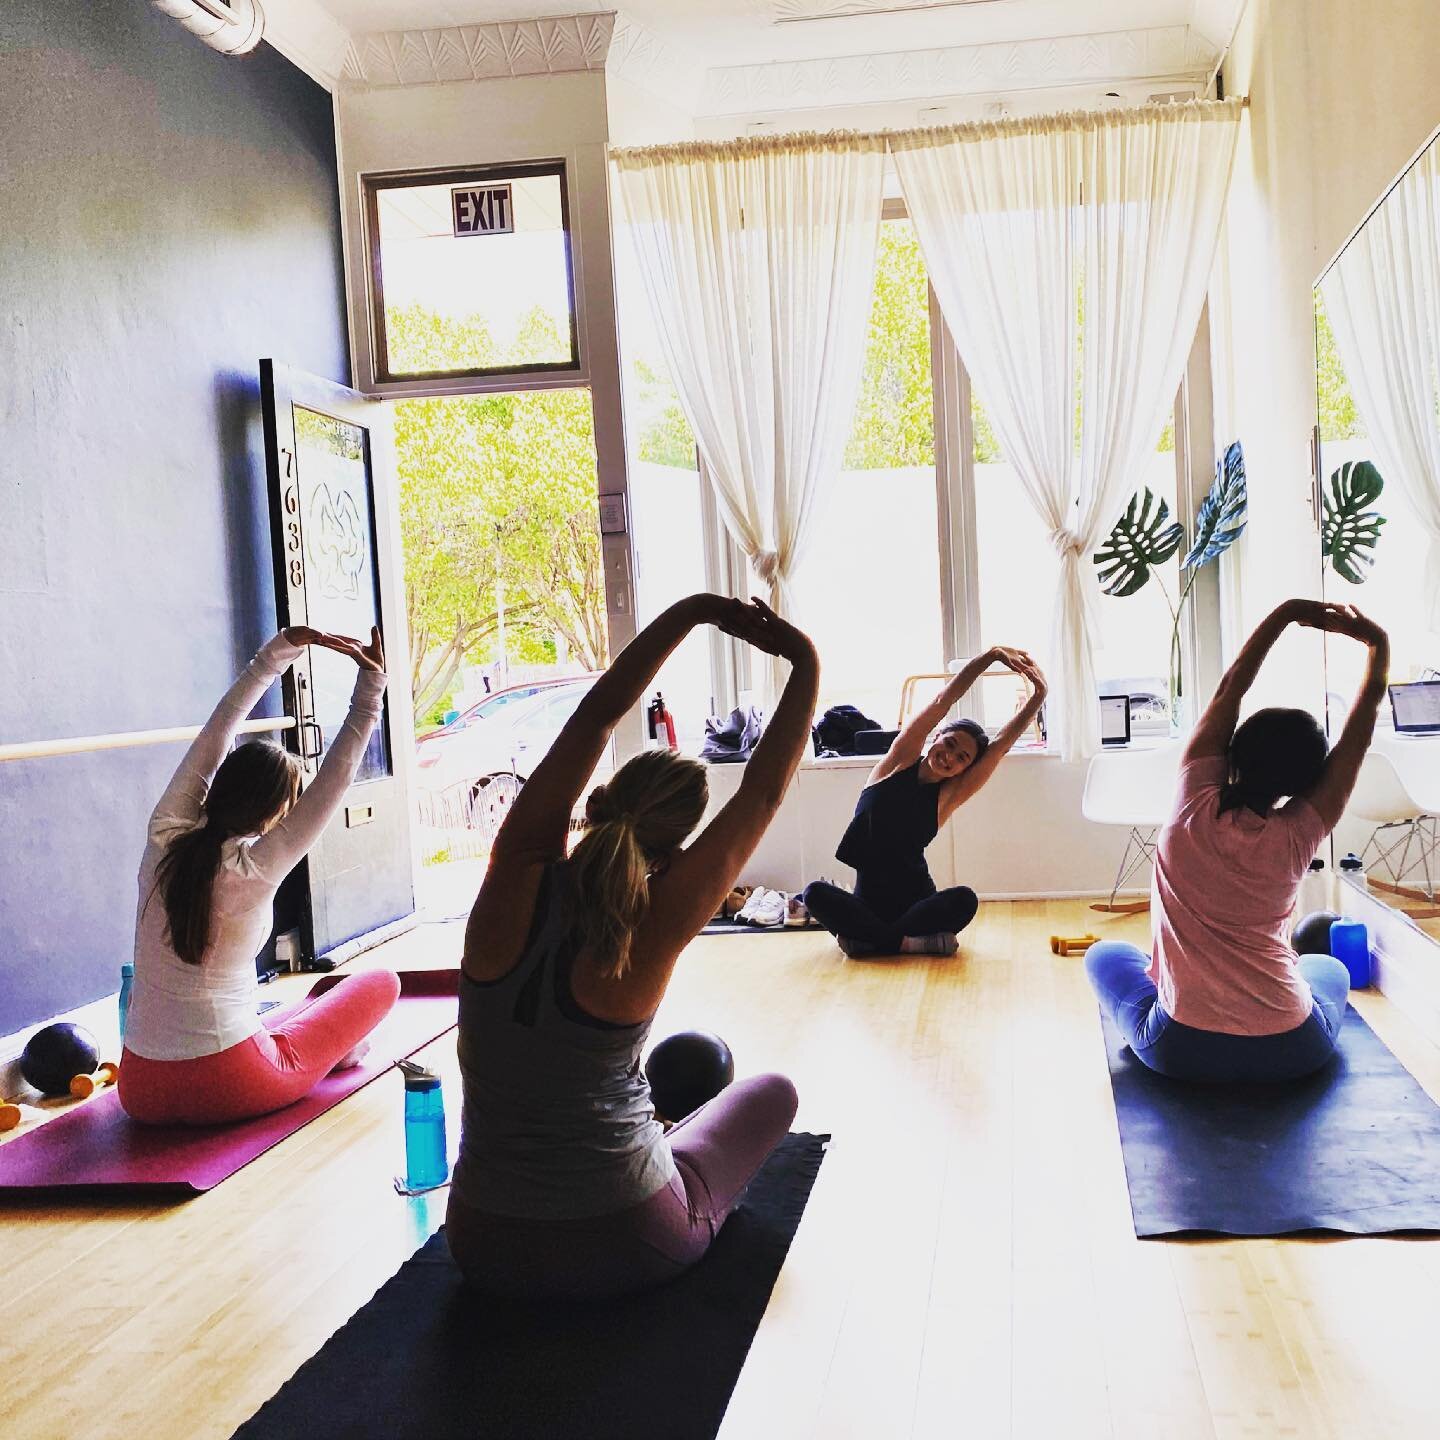 This morning as I took my final shavasana, I had a moment of clarity in this blur we call new motherhood. I was surrounded by 5 other pregnant or postpartum women. All of us taking 45 minutes to connect to our bodies through movement and at the same 